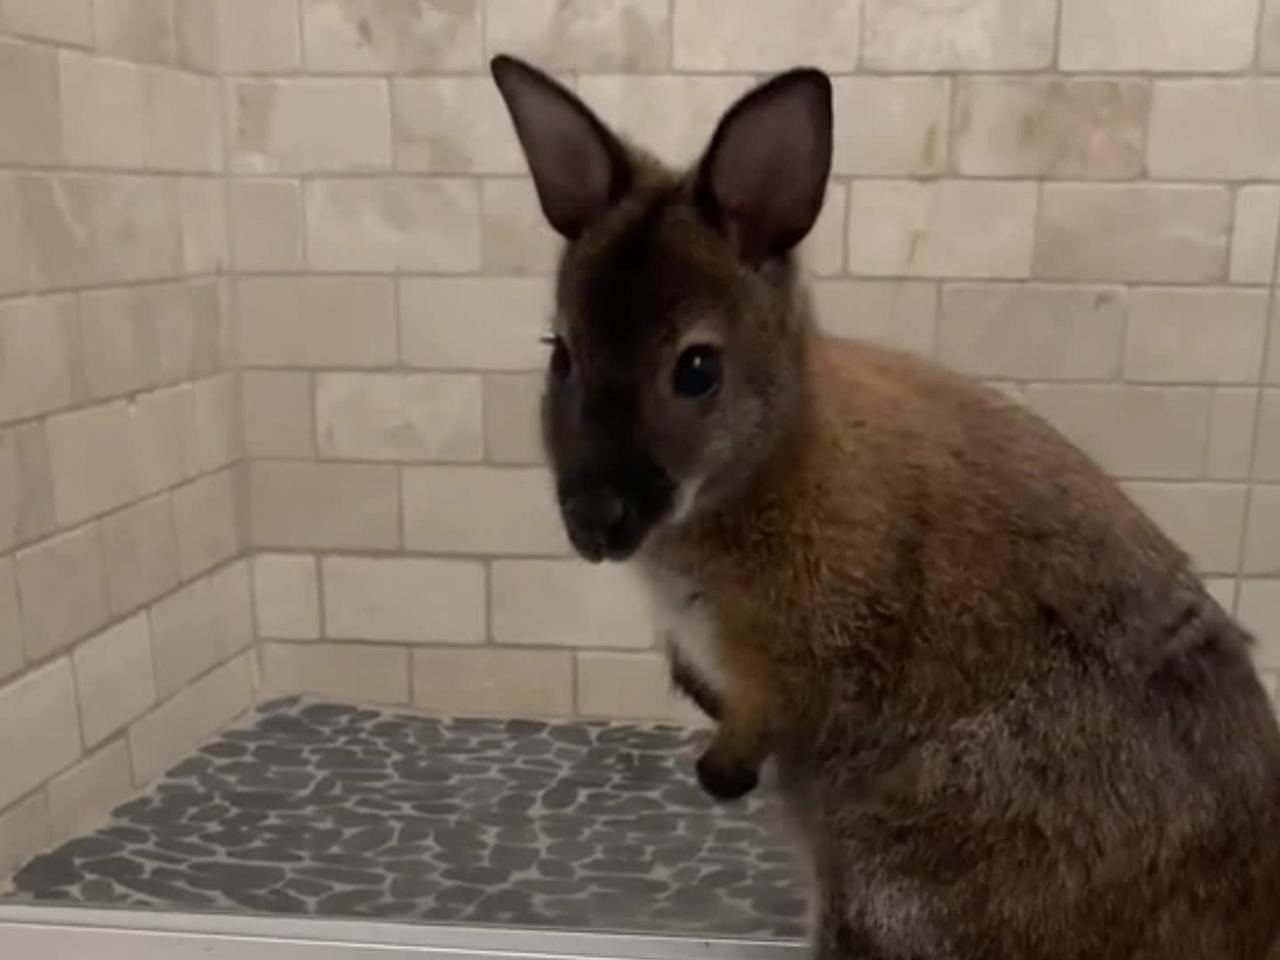 The wallaby ran to the bathroom